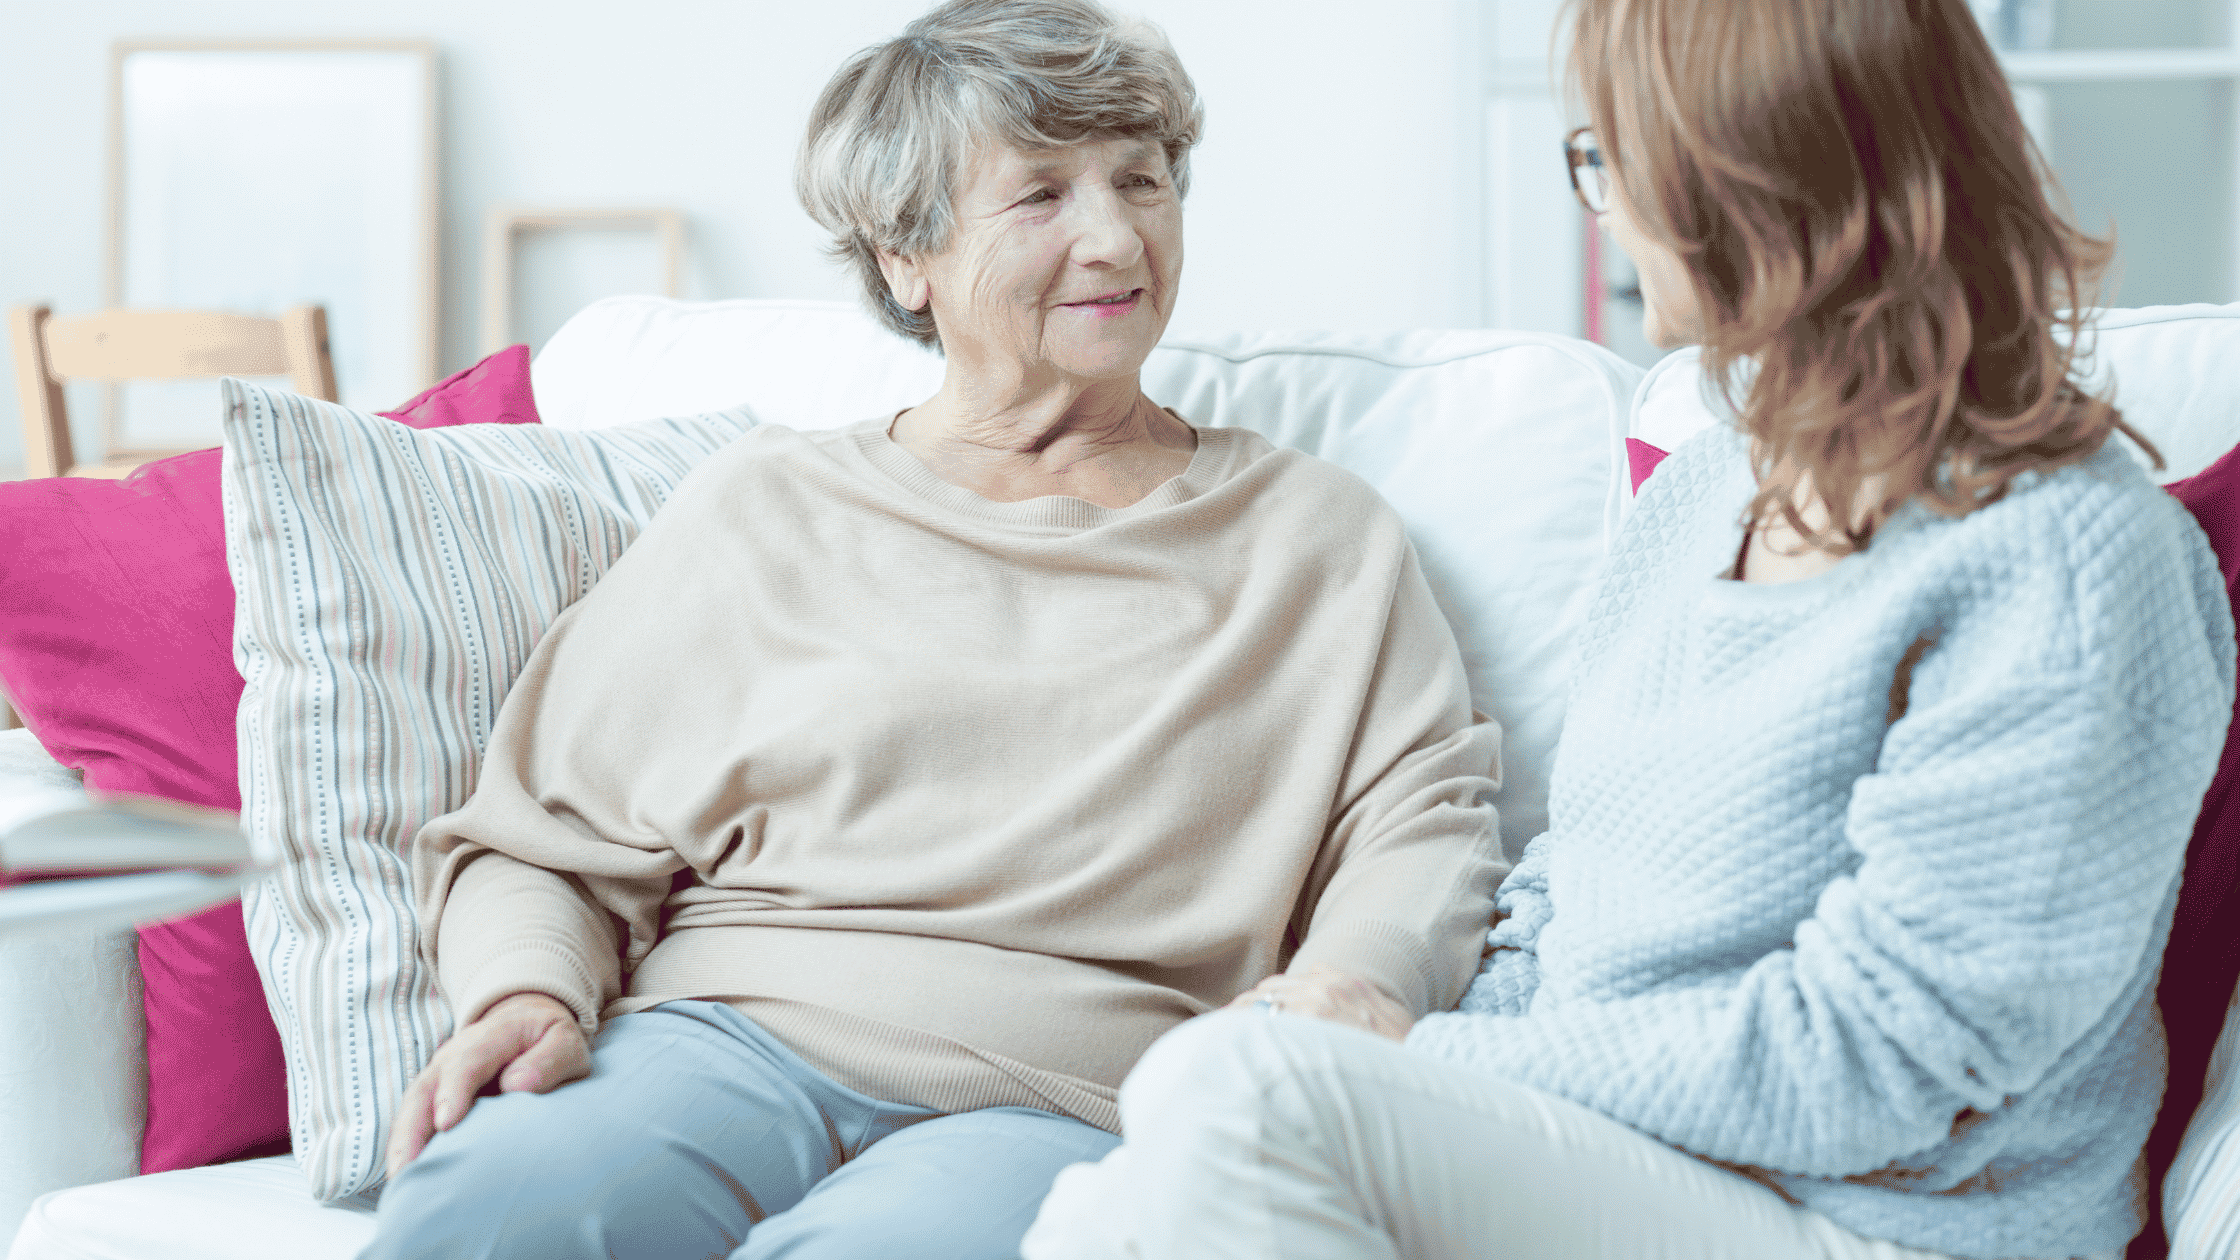 Are You Ready To Be a Caregiver?